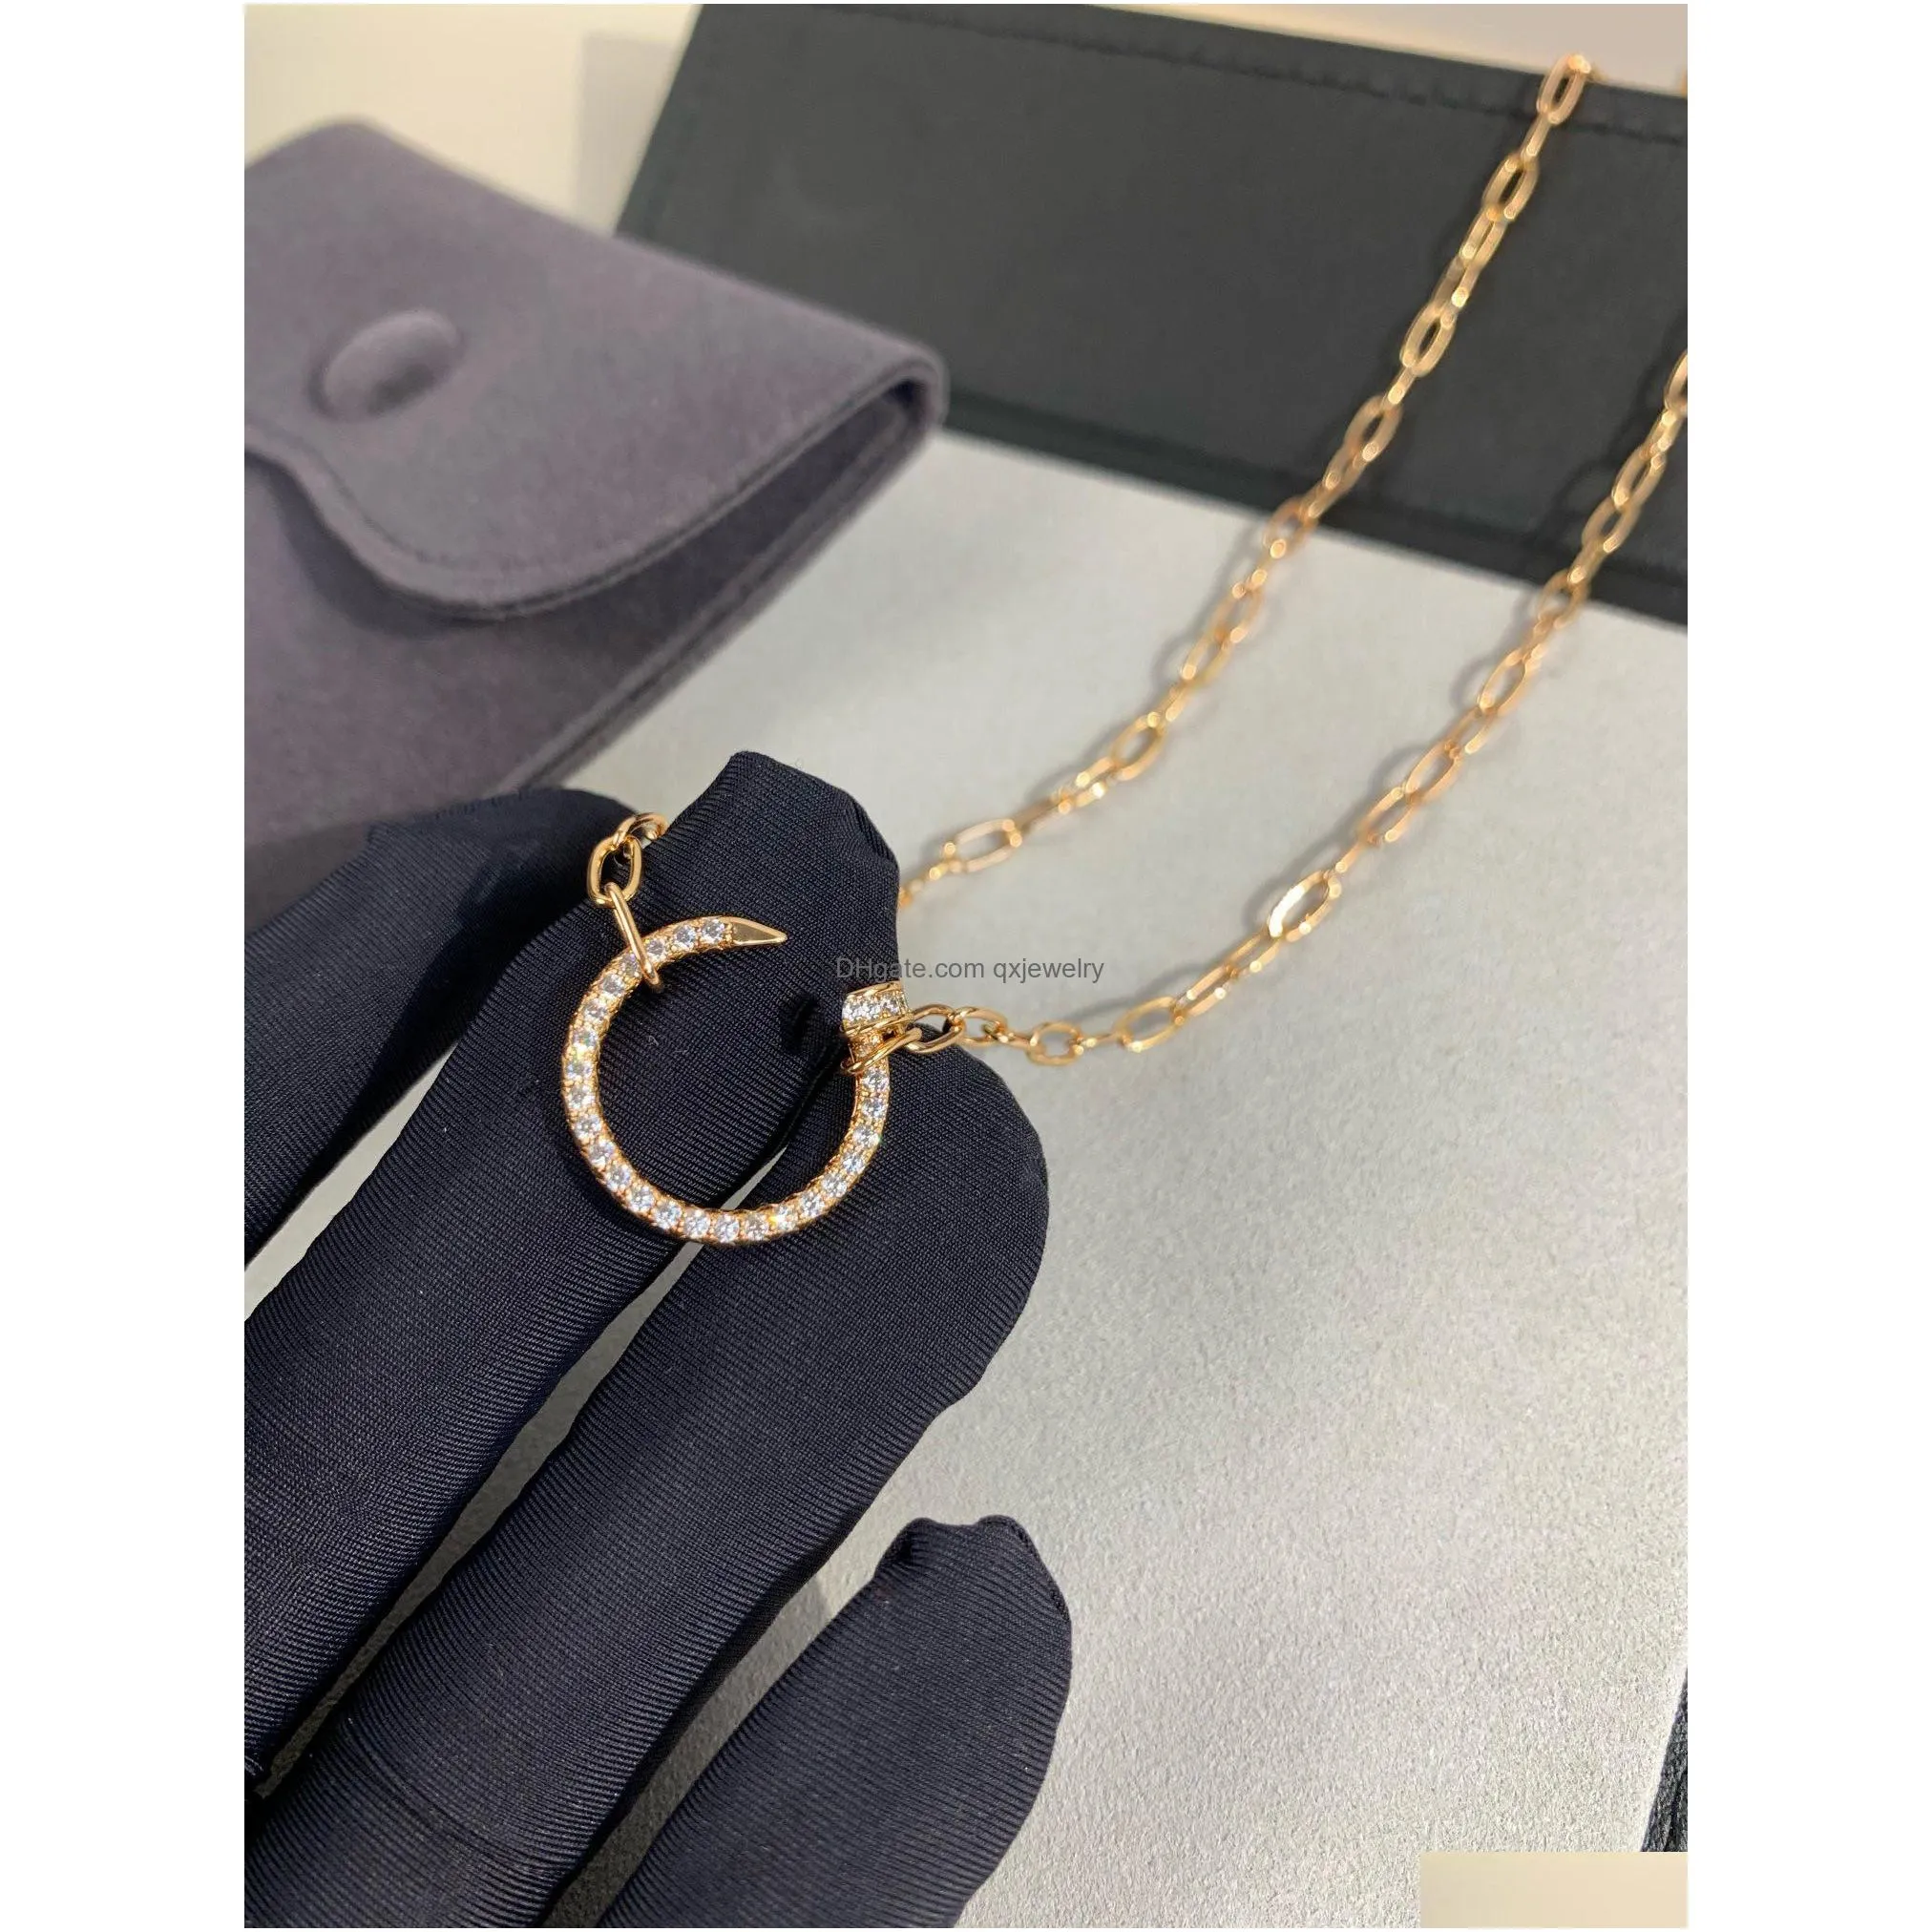 Bracelet, Earrings & Necklace New Fashion Look Top -Selling Bracelet Wistic Cuff Classic For Women Men Clasp Gold Plated Bangle Jewel Dhstx